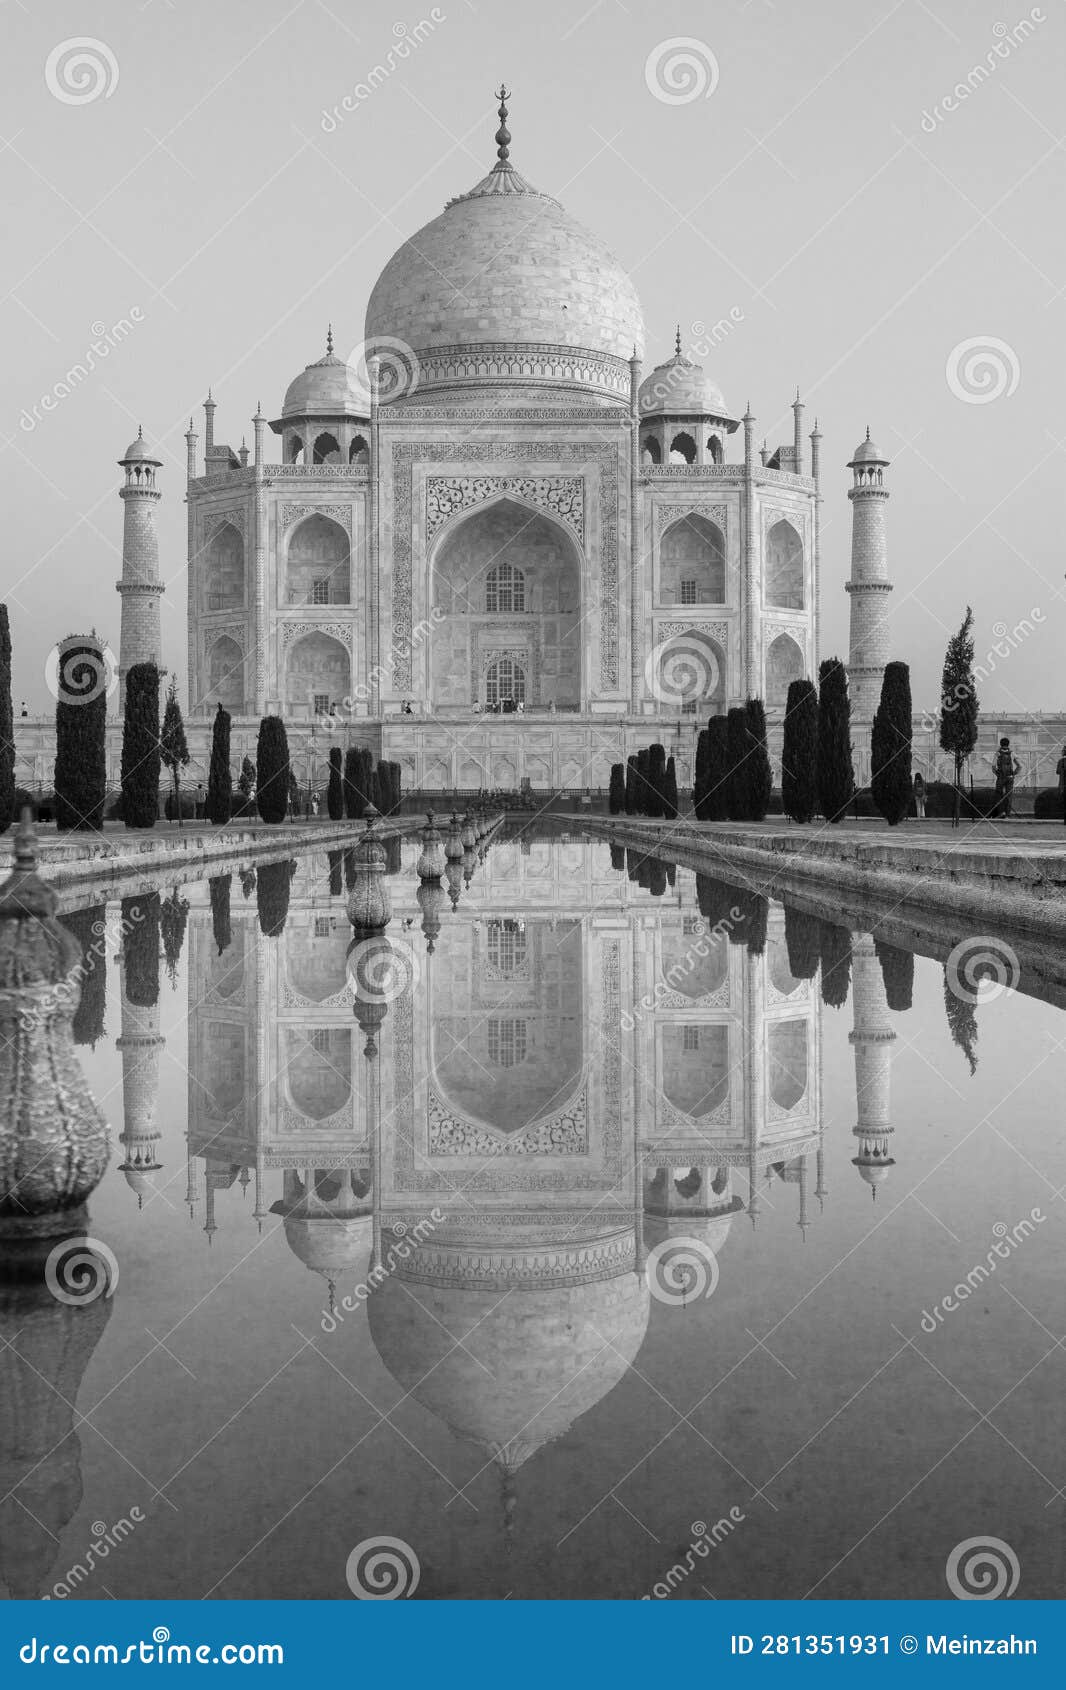 taj mahal in morning light with the inscription of the coran in arabic letter meaning in english: this is an invitation to live on